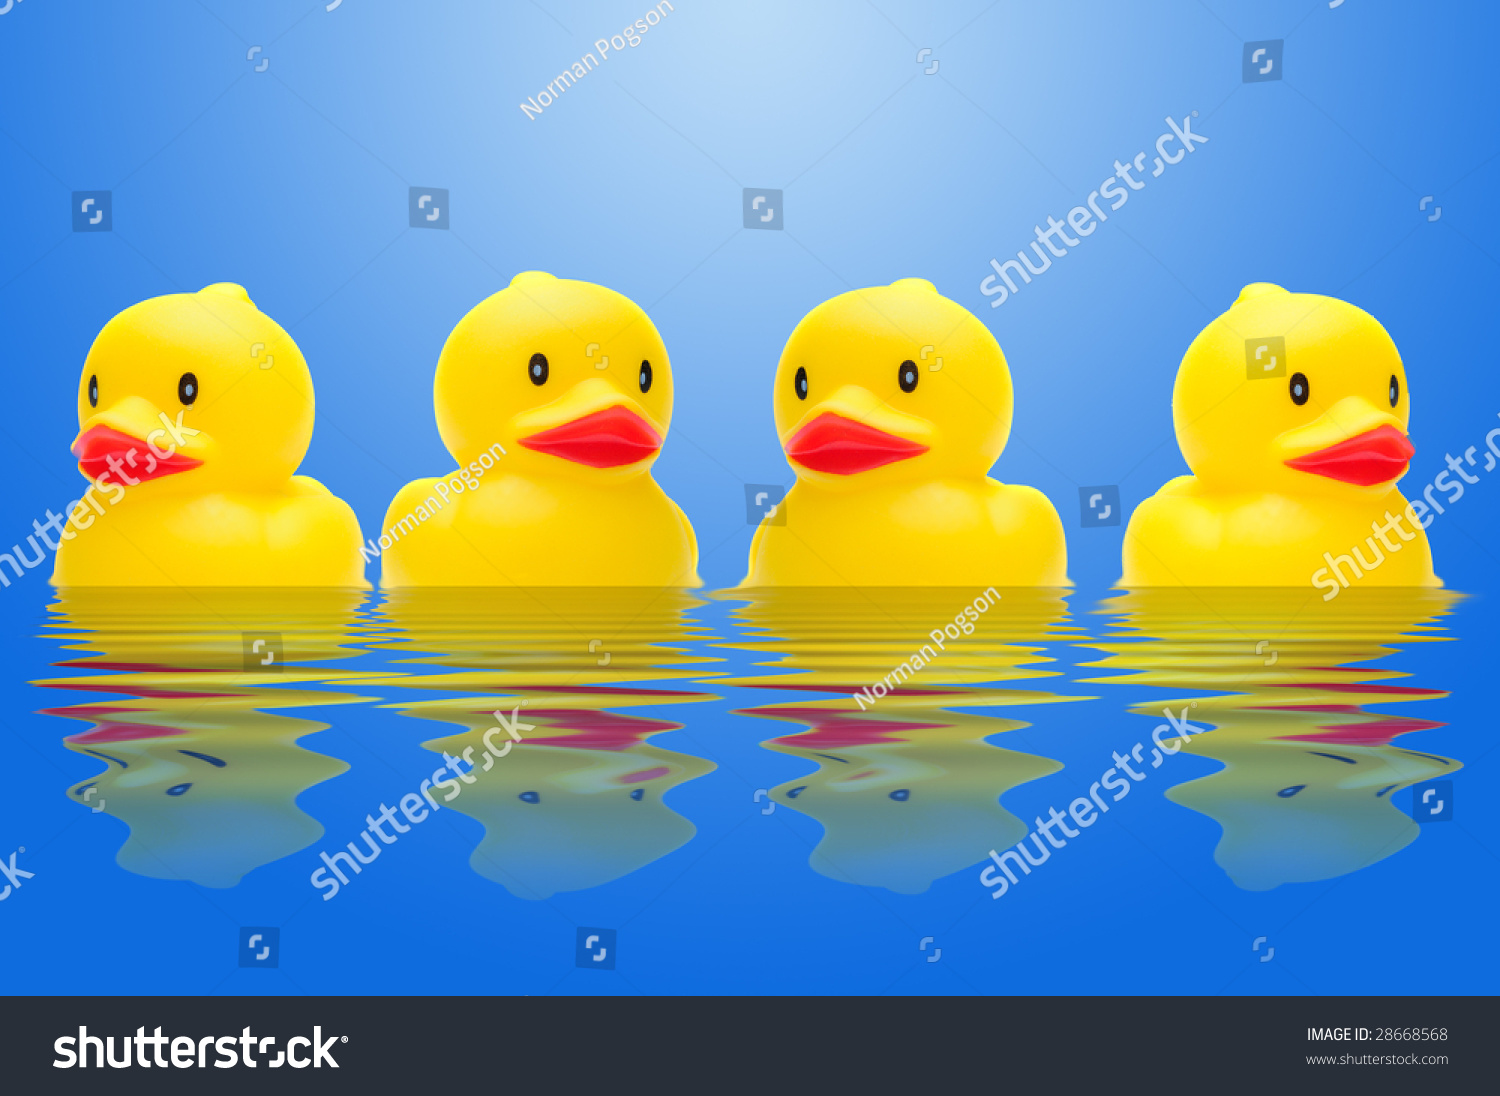 Image result for toy ducks